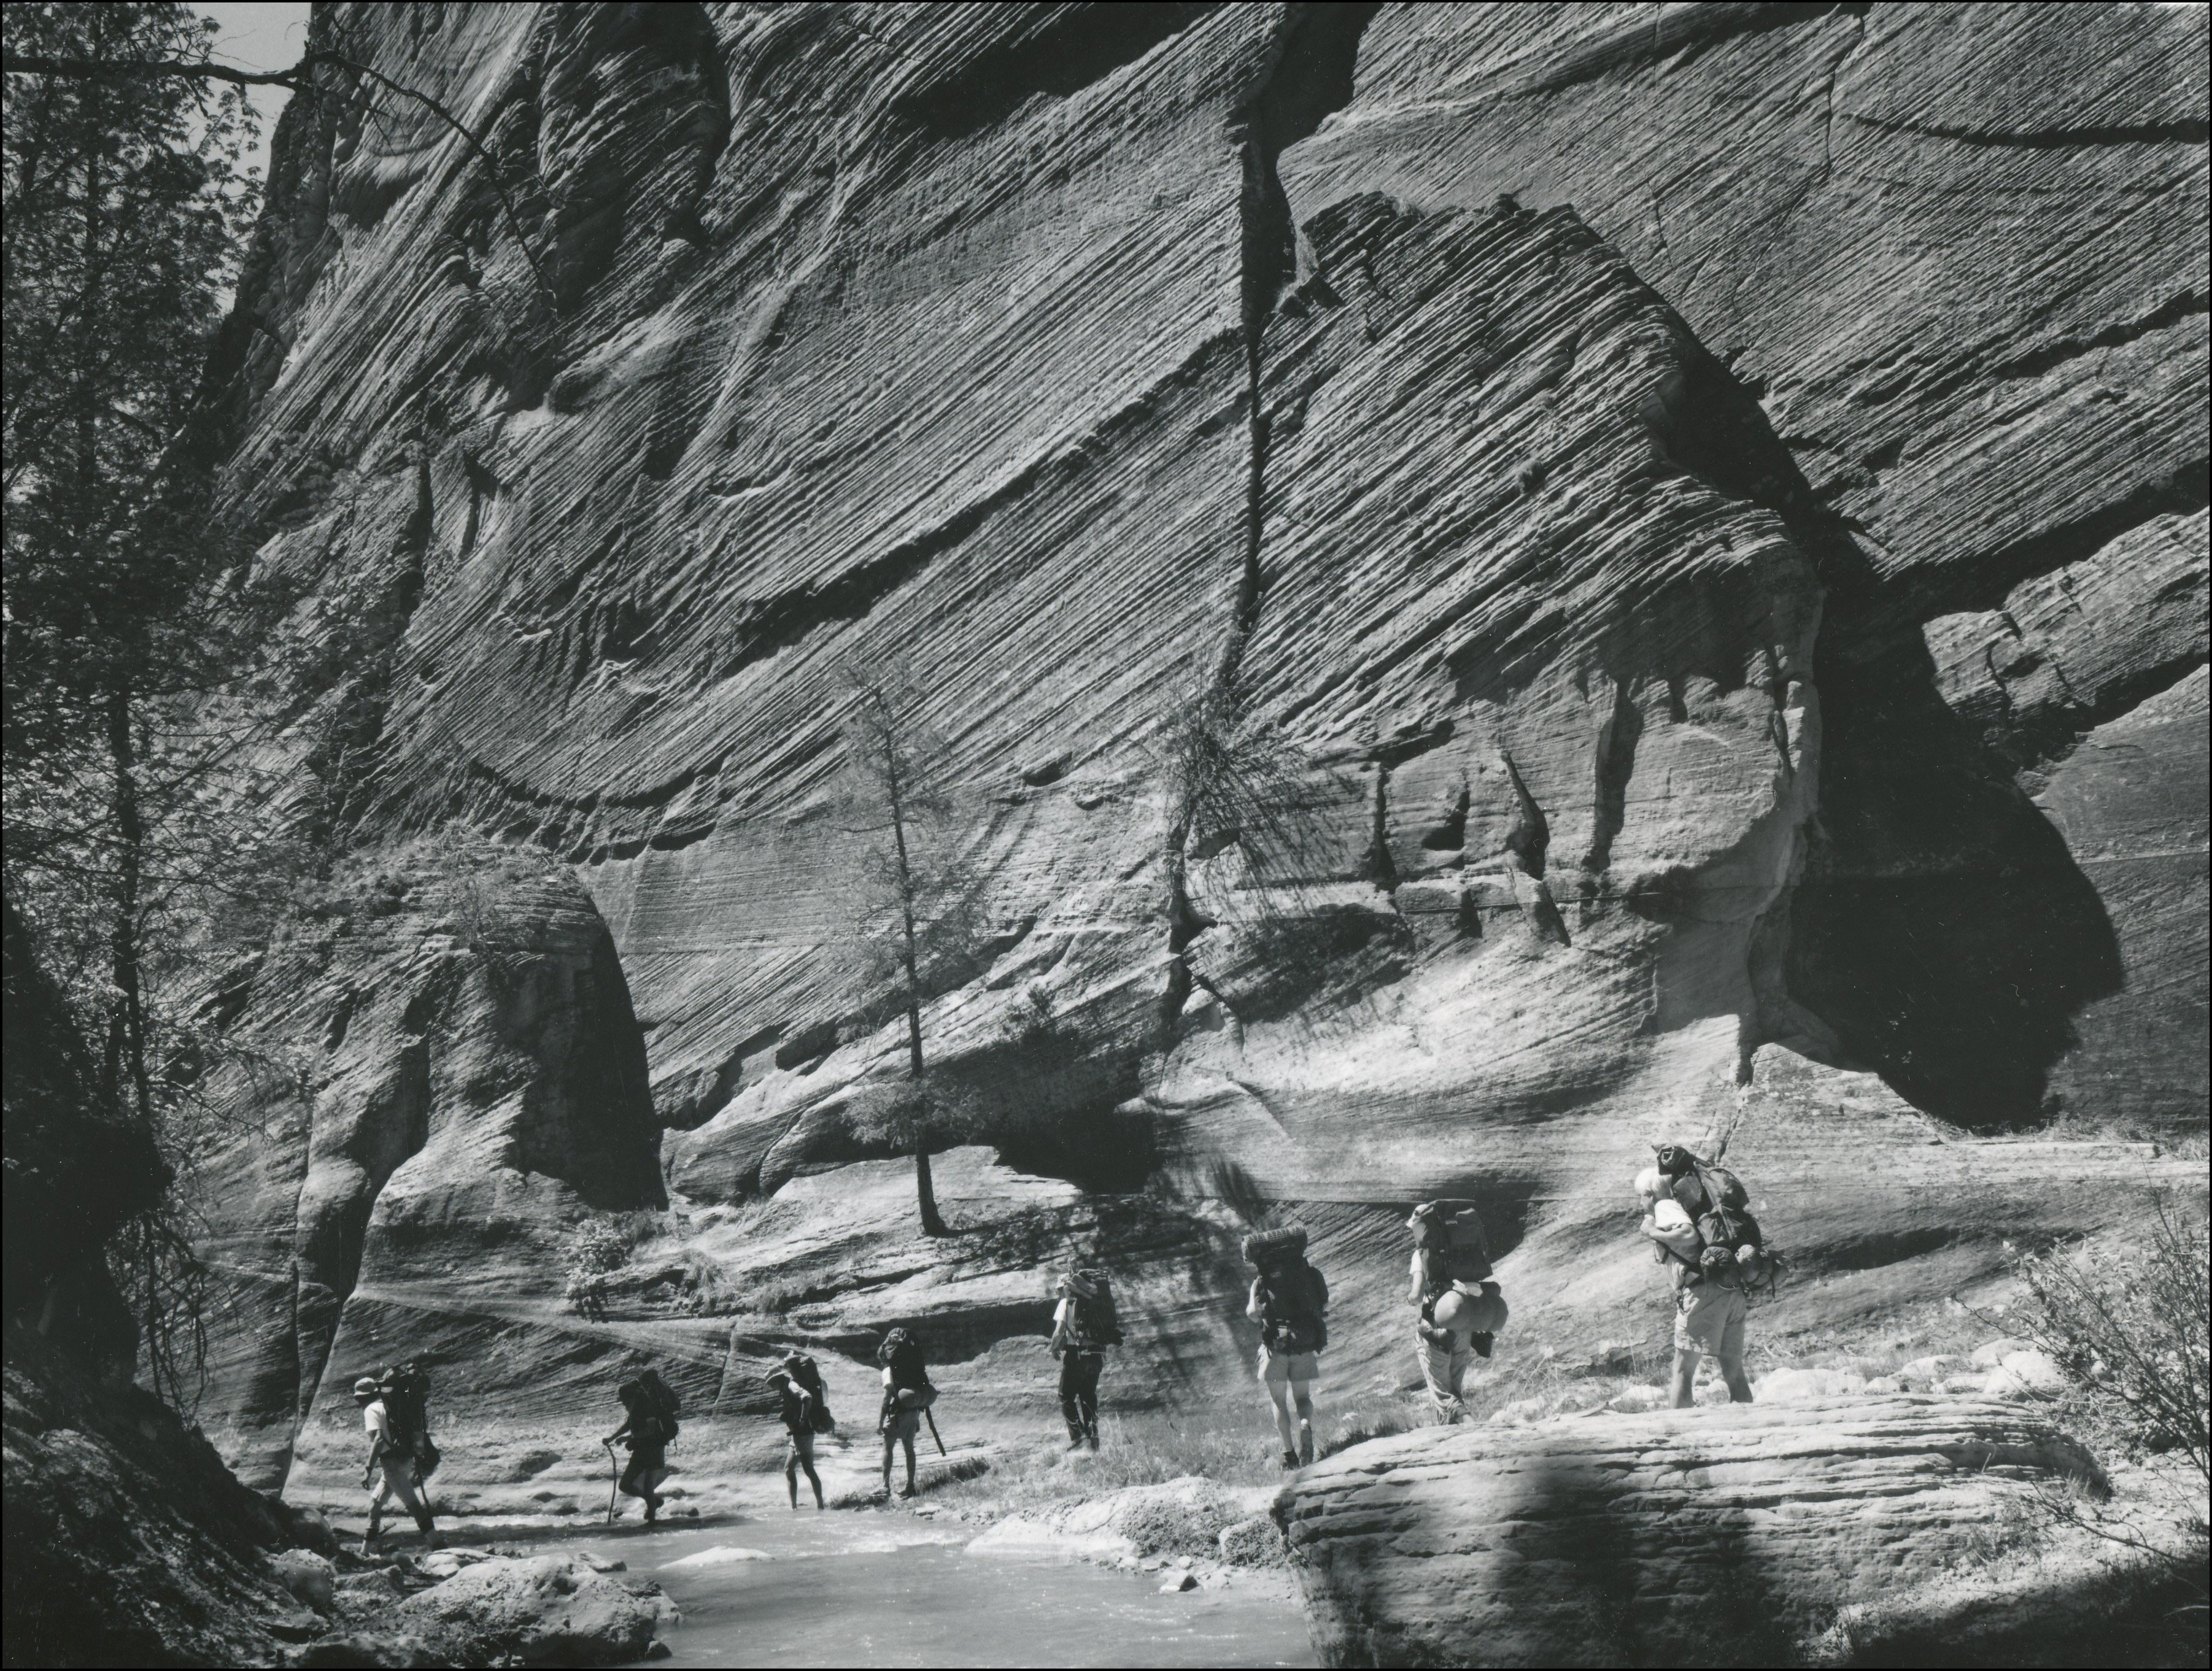 several people walking down a trail in single file at the bottom of tall rock ledges